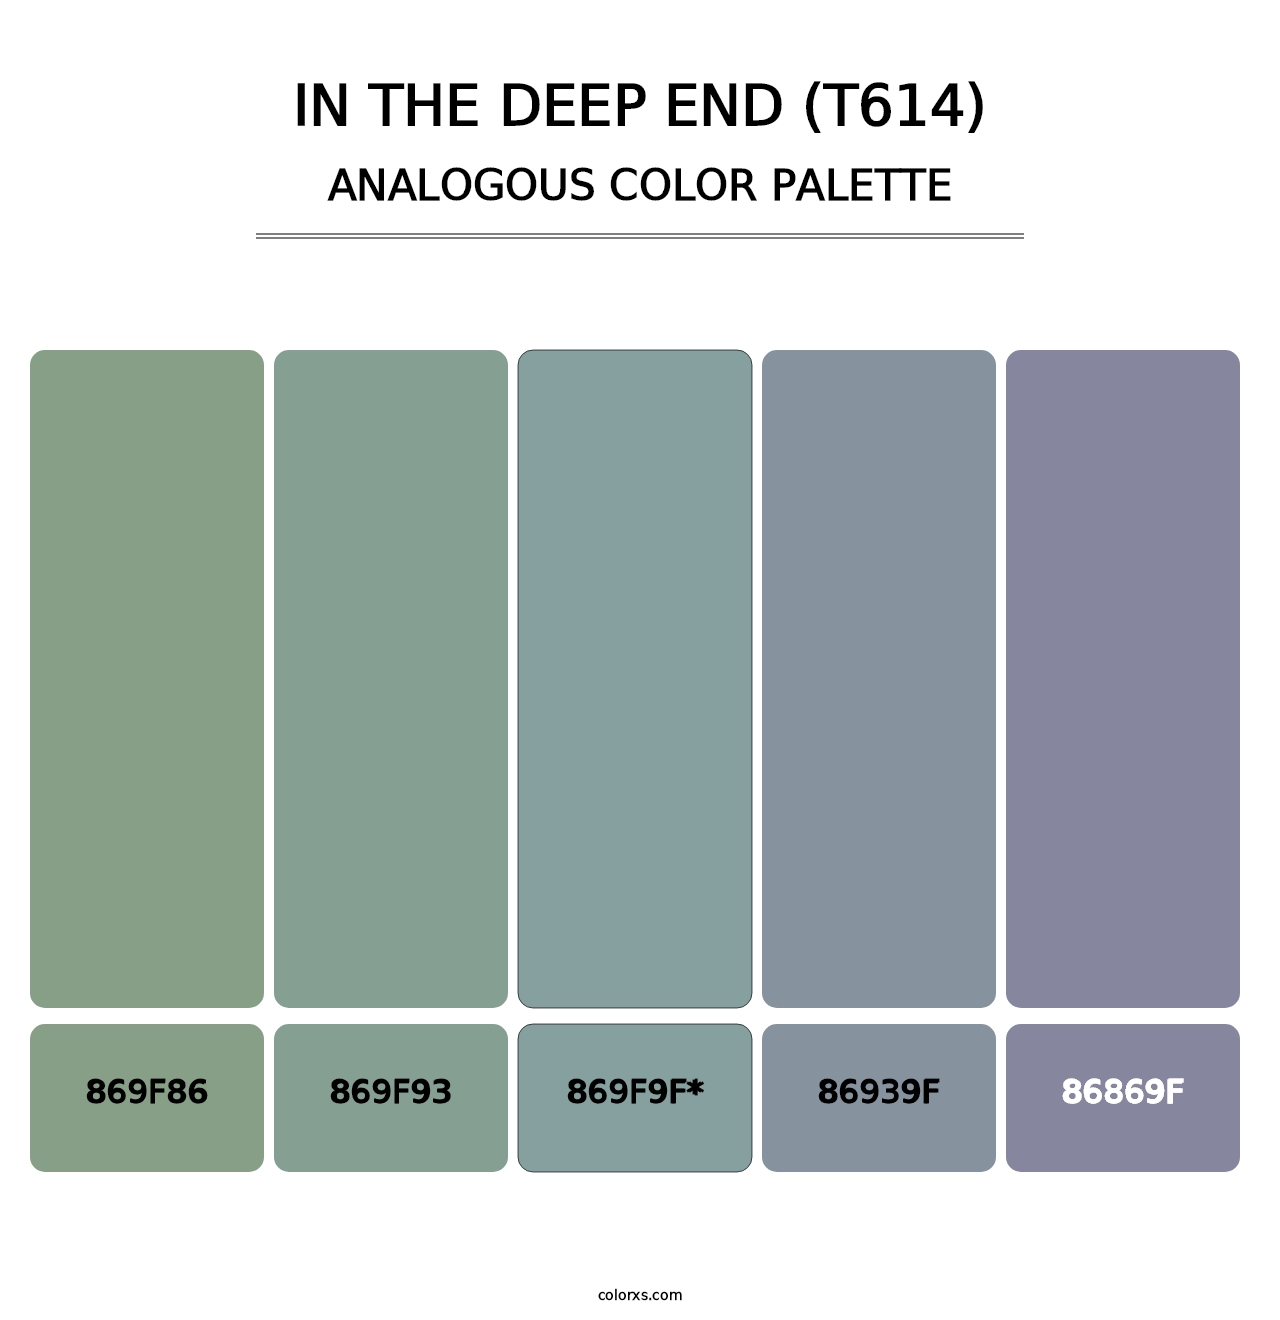 In the Deep End (T614) - Analogous Color Palette